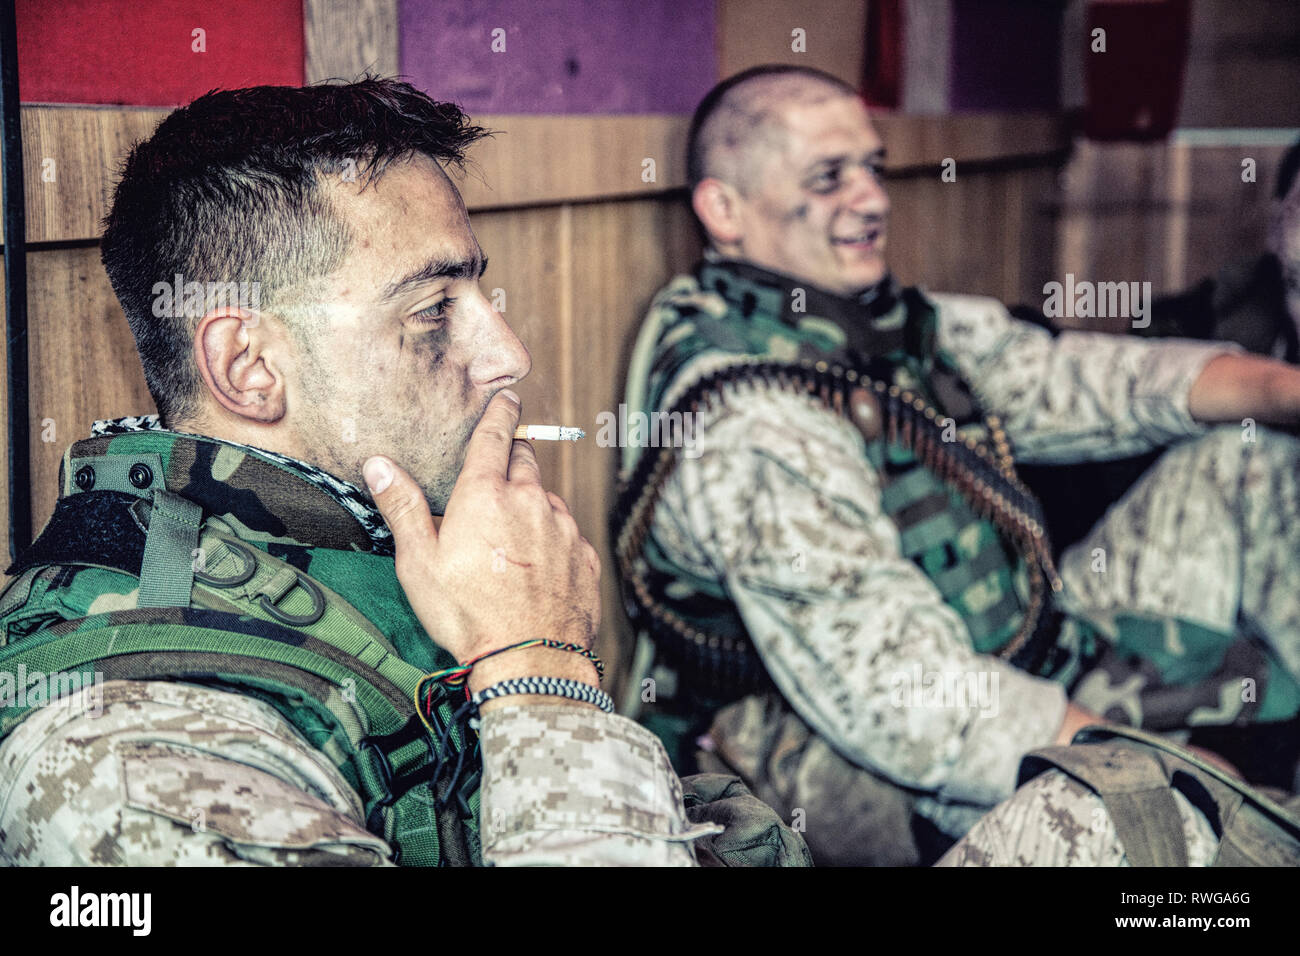 U.S. Marines talking and resting while sitting on the floor at their combat outpost. Stock Photo